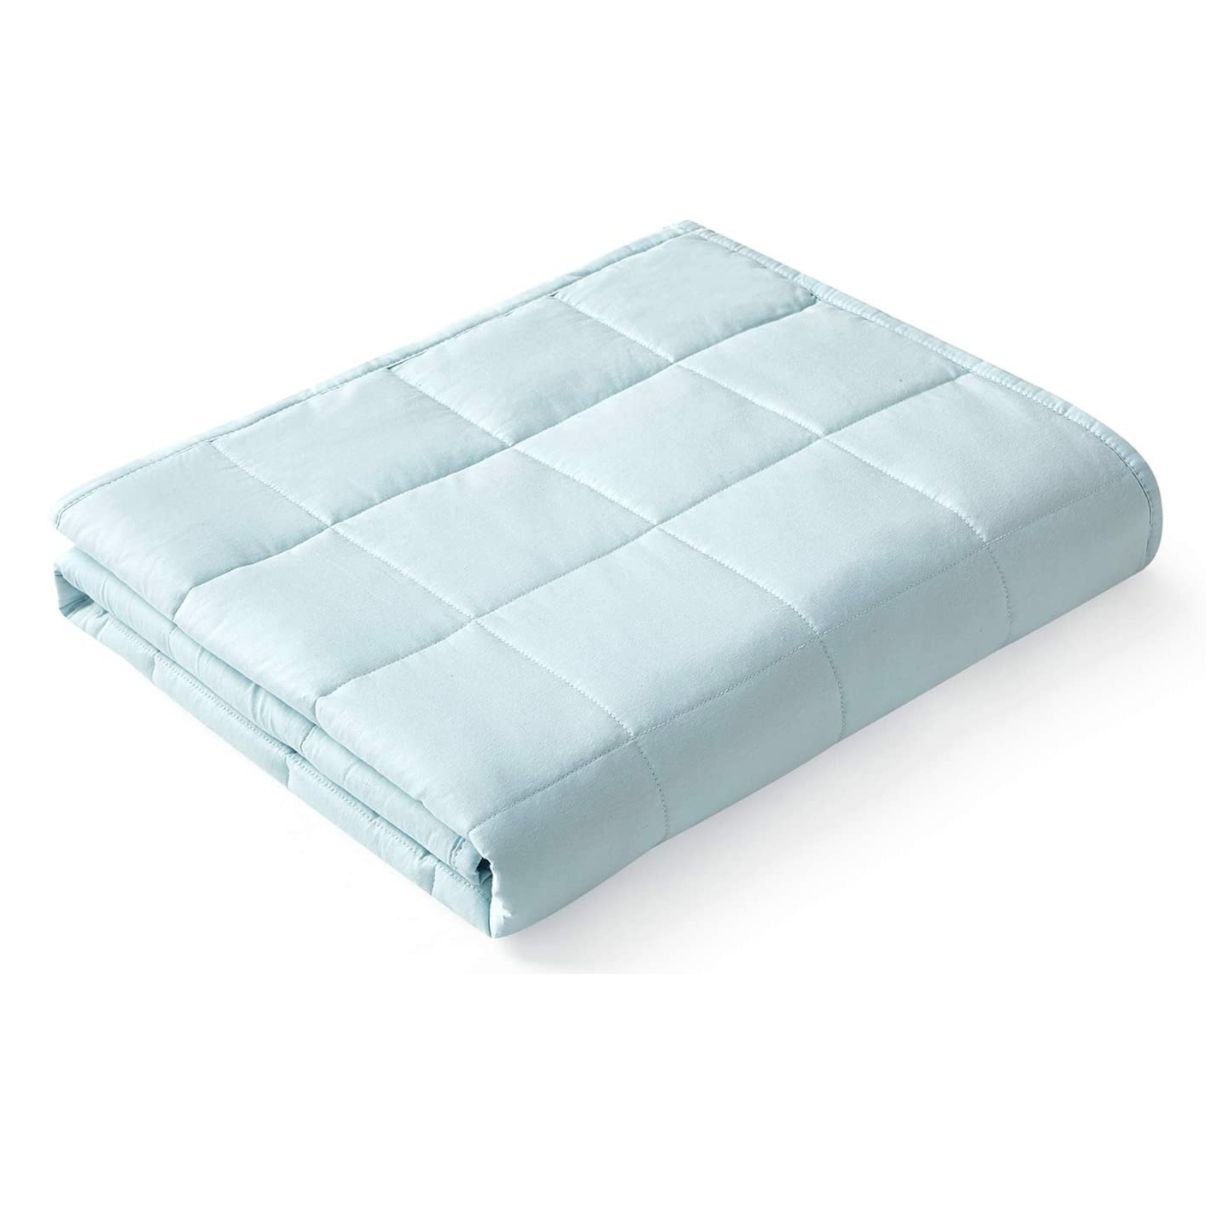 YnM Weighted Blanket 